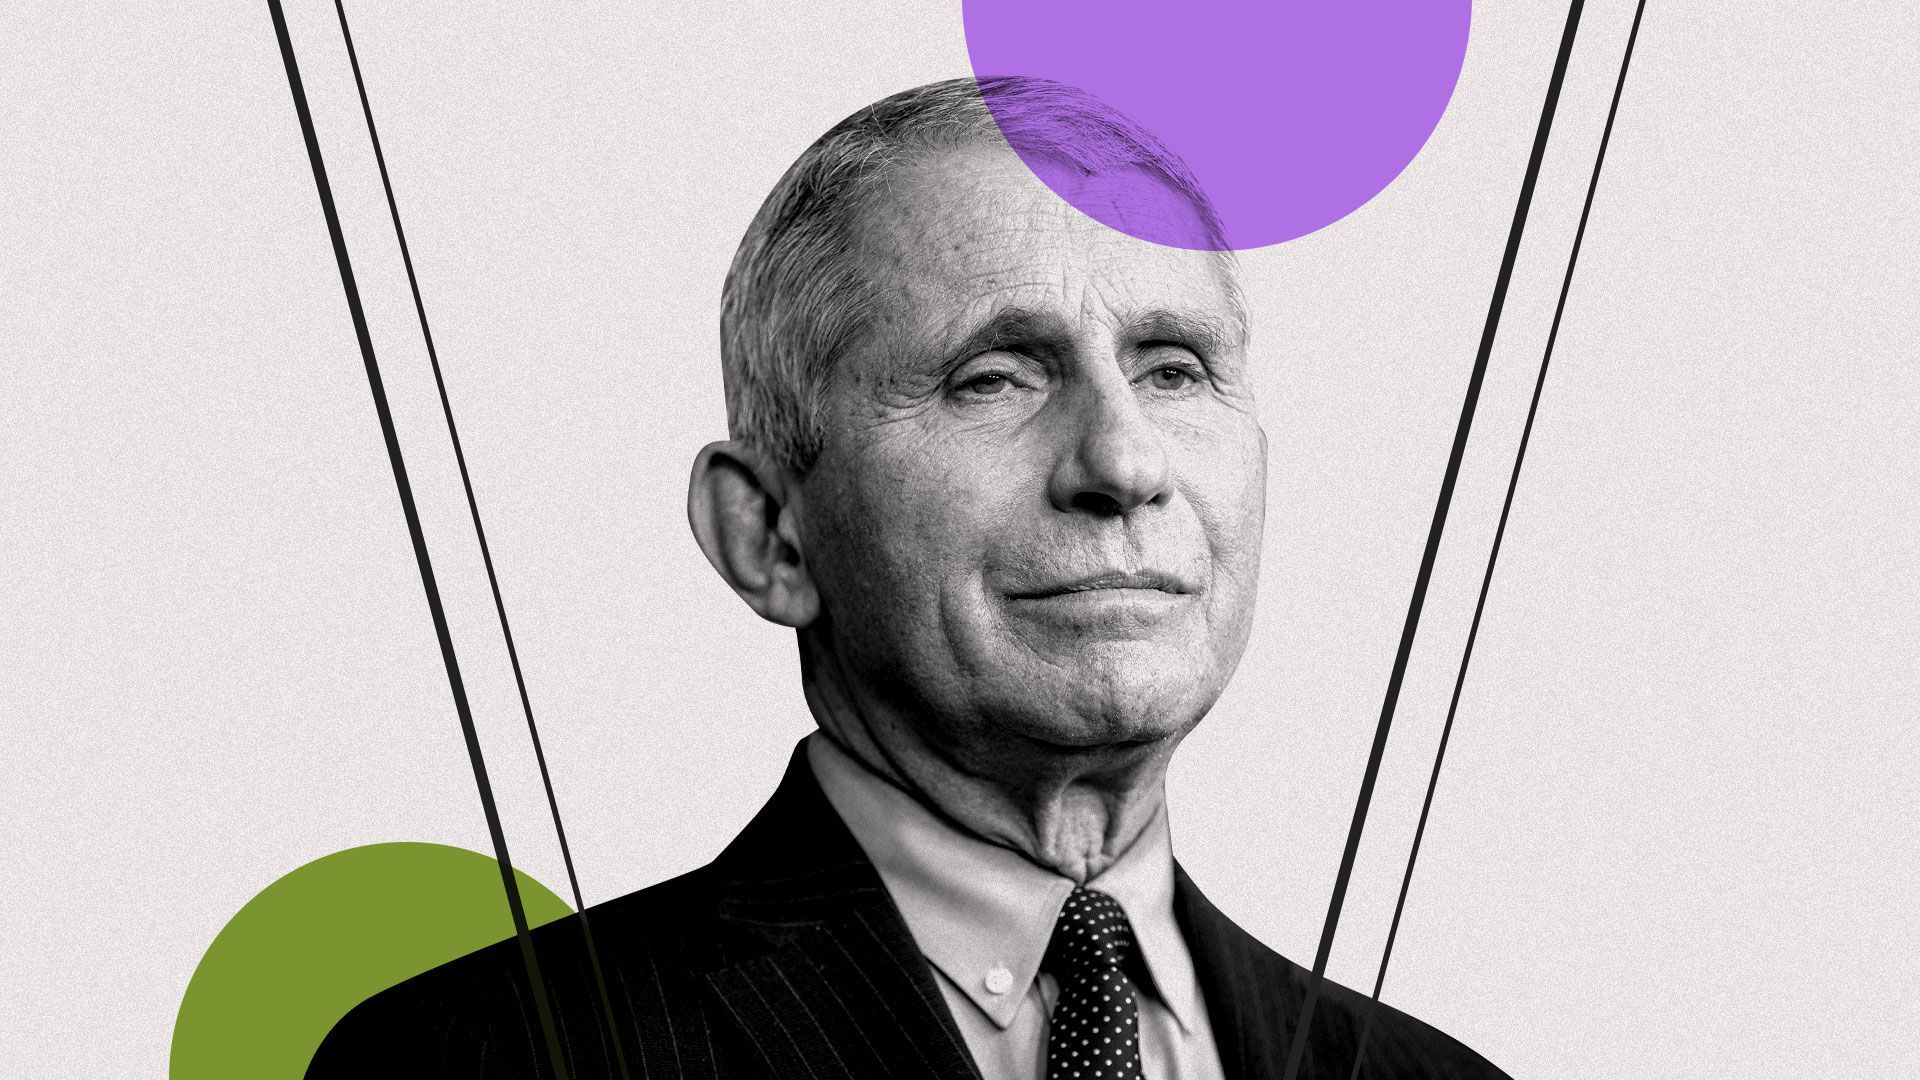 Photo illustration of Dr. Anthony Fauci and geometric shapes